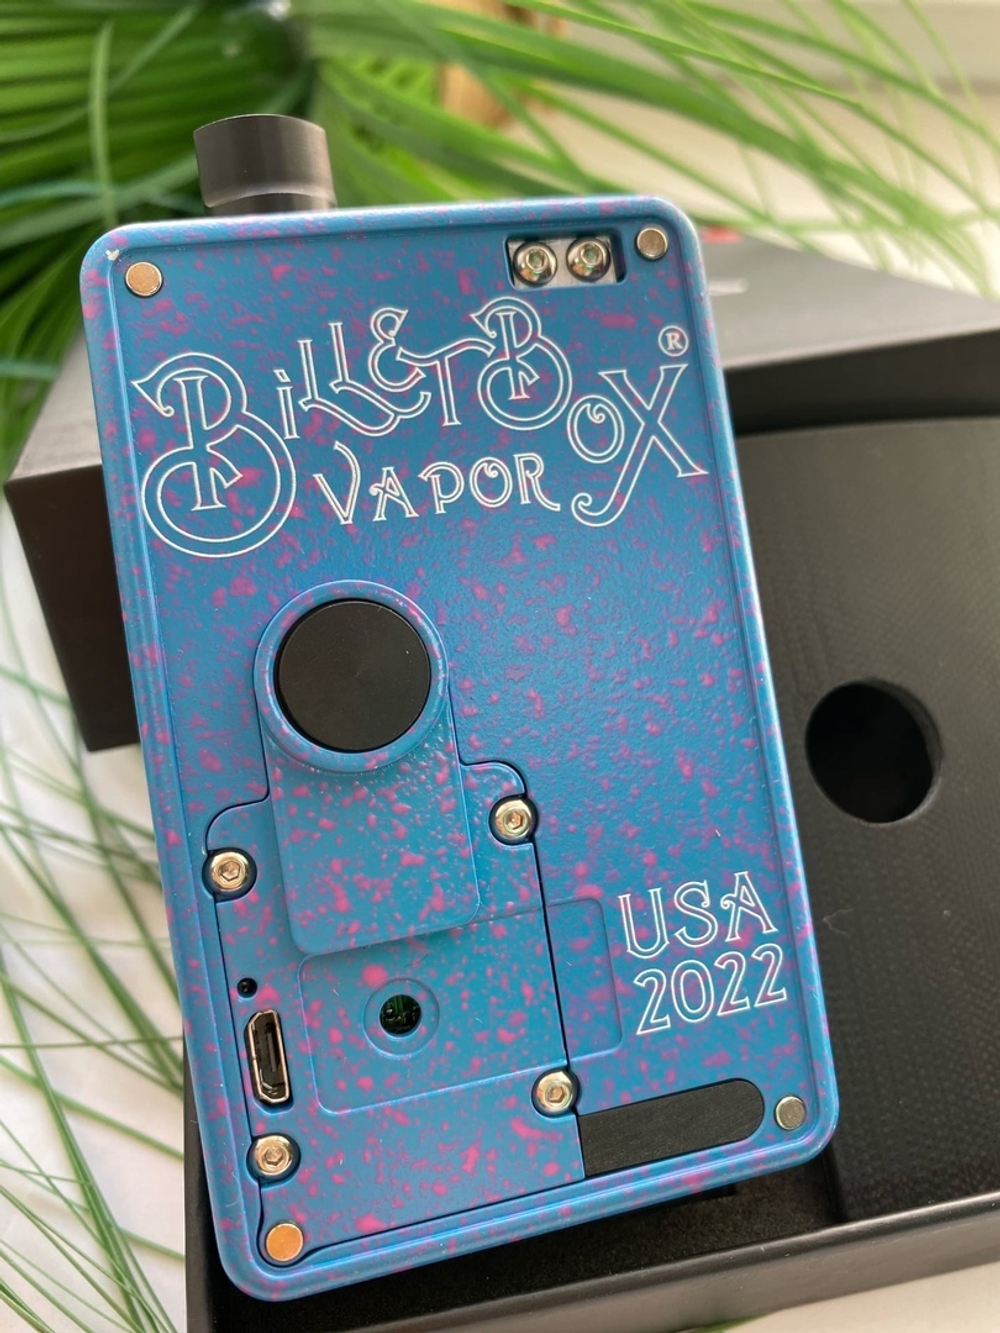 Набор BilletBox DNA60 by SXK